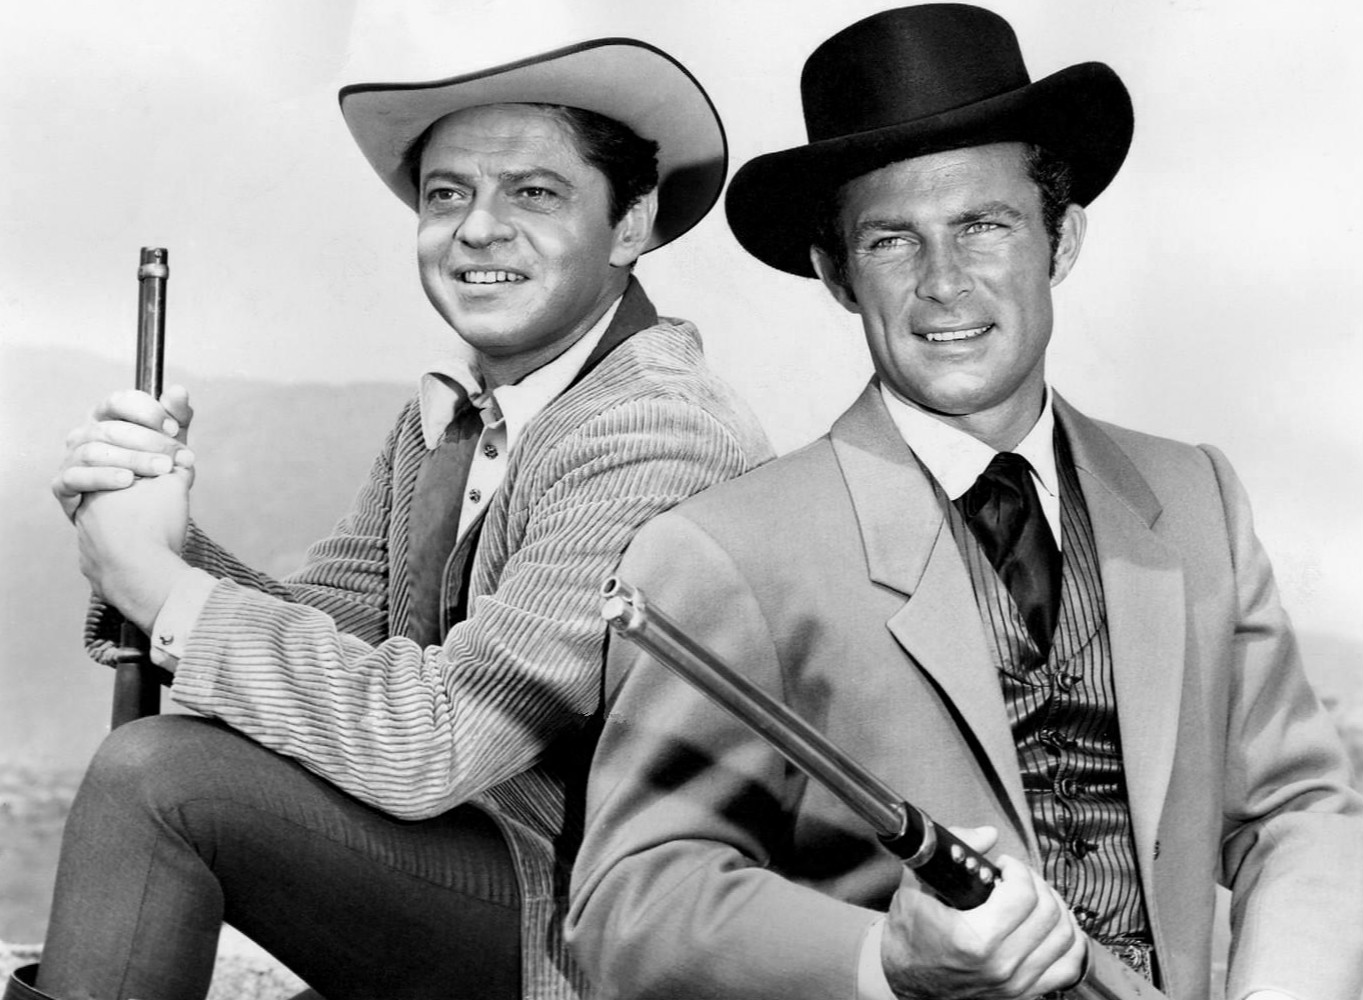 Can You Name These 1960s TV Shows? (Medium Level) 16 The Wild Wild West